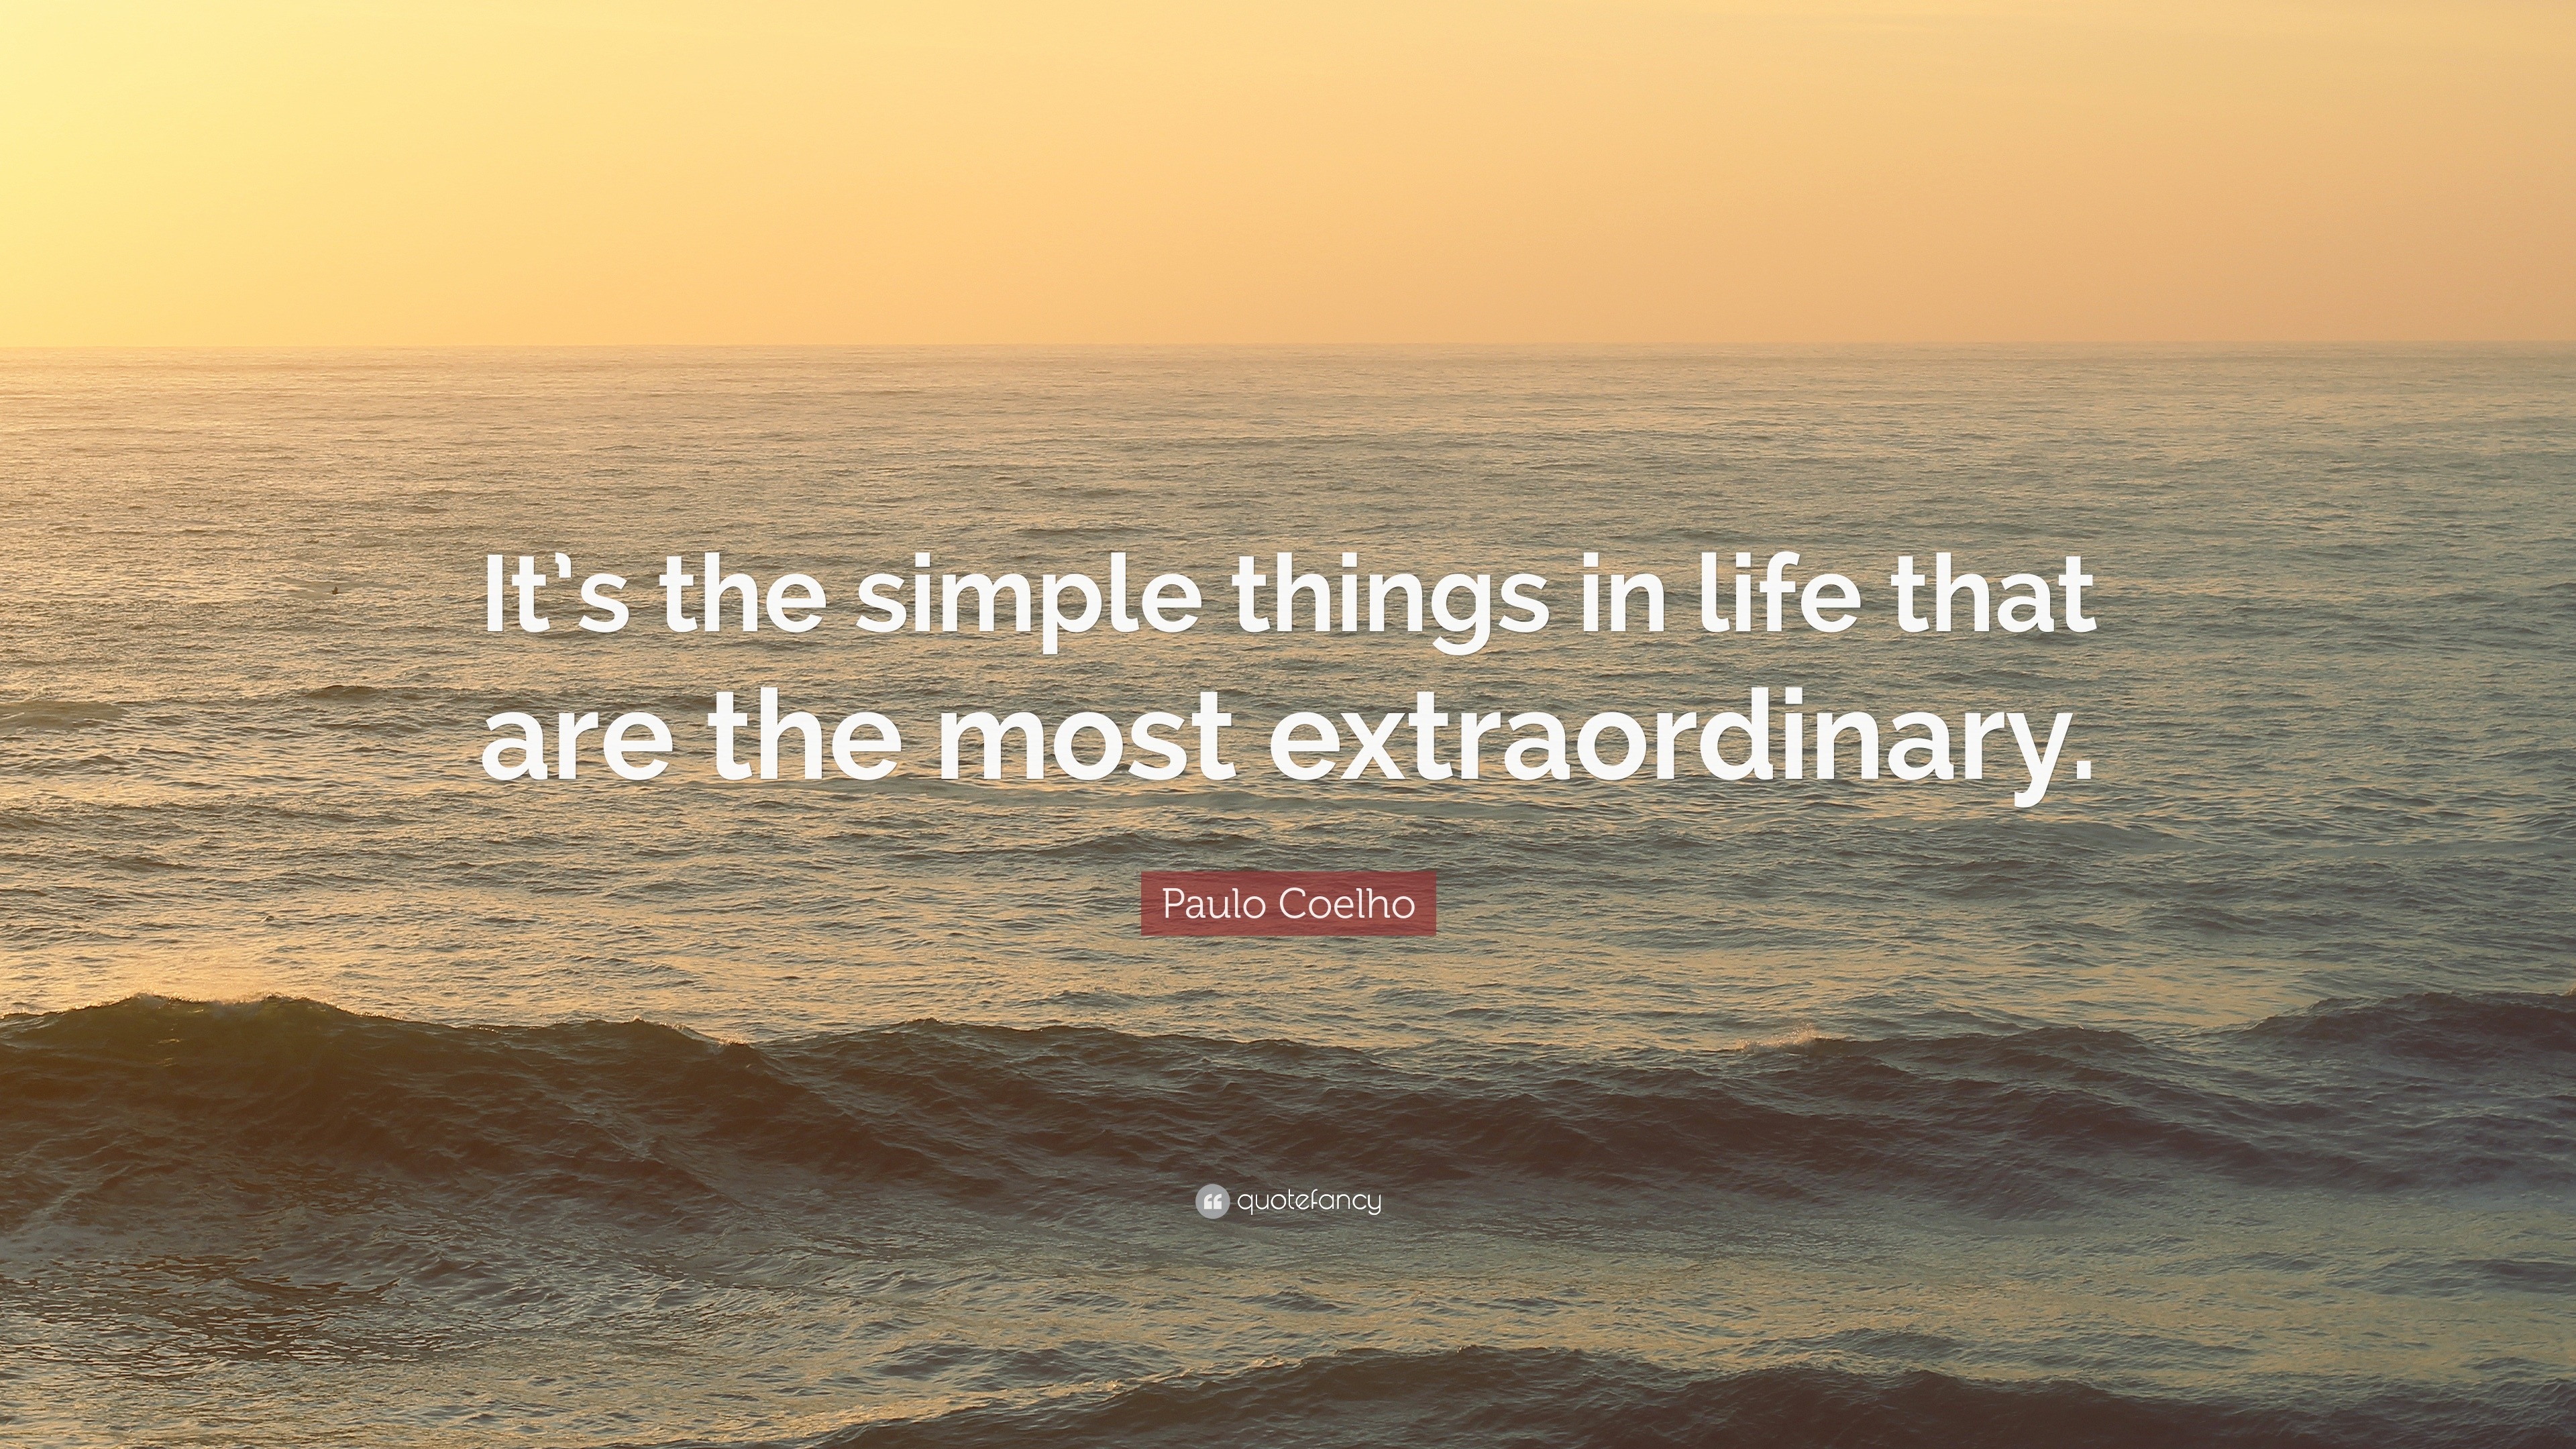 Paulo Coelho Quote “It s the simple things in life that are the most extraordinary